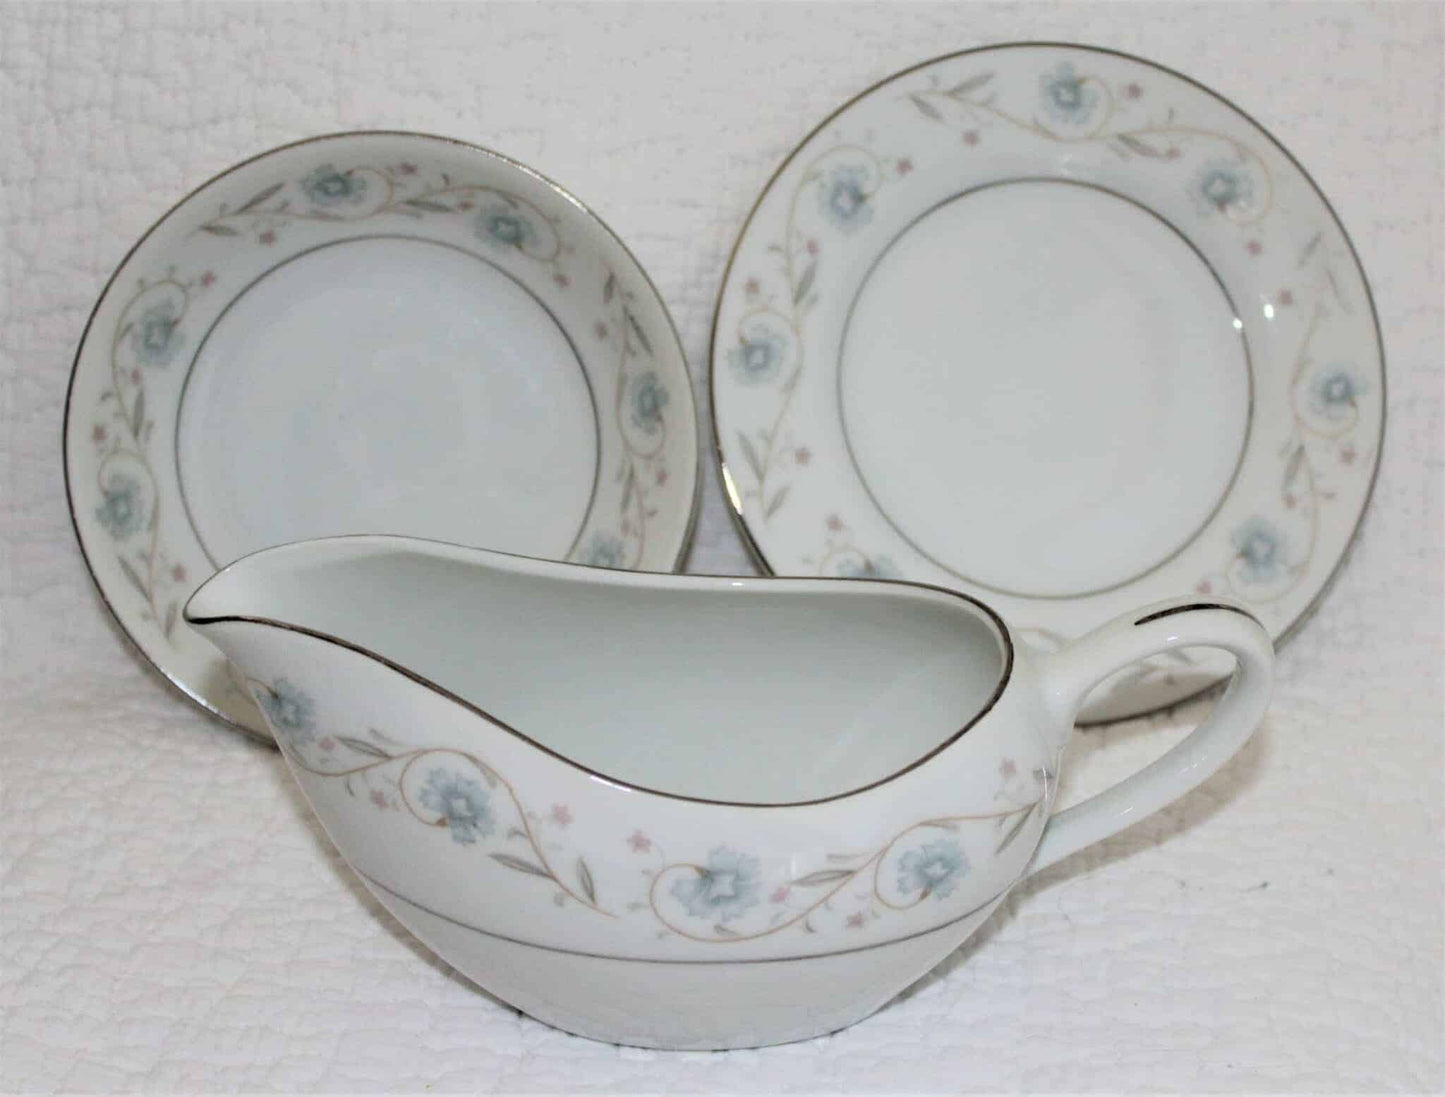 Bread & Butter Plates, Fine China of Japan, English Garden, Set of 4, Vintage